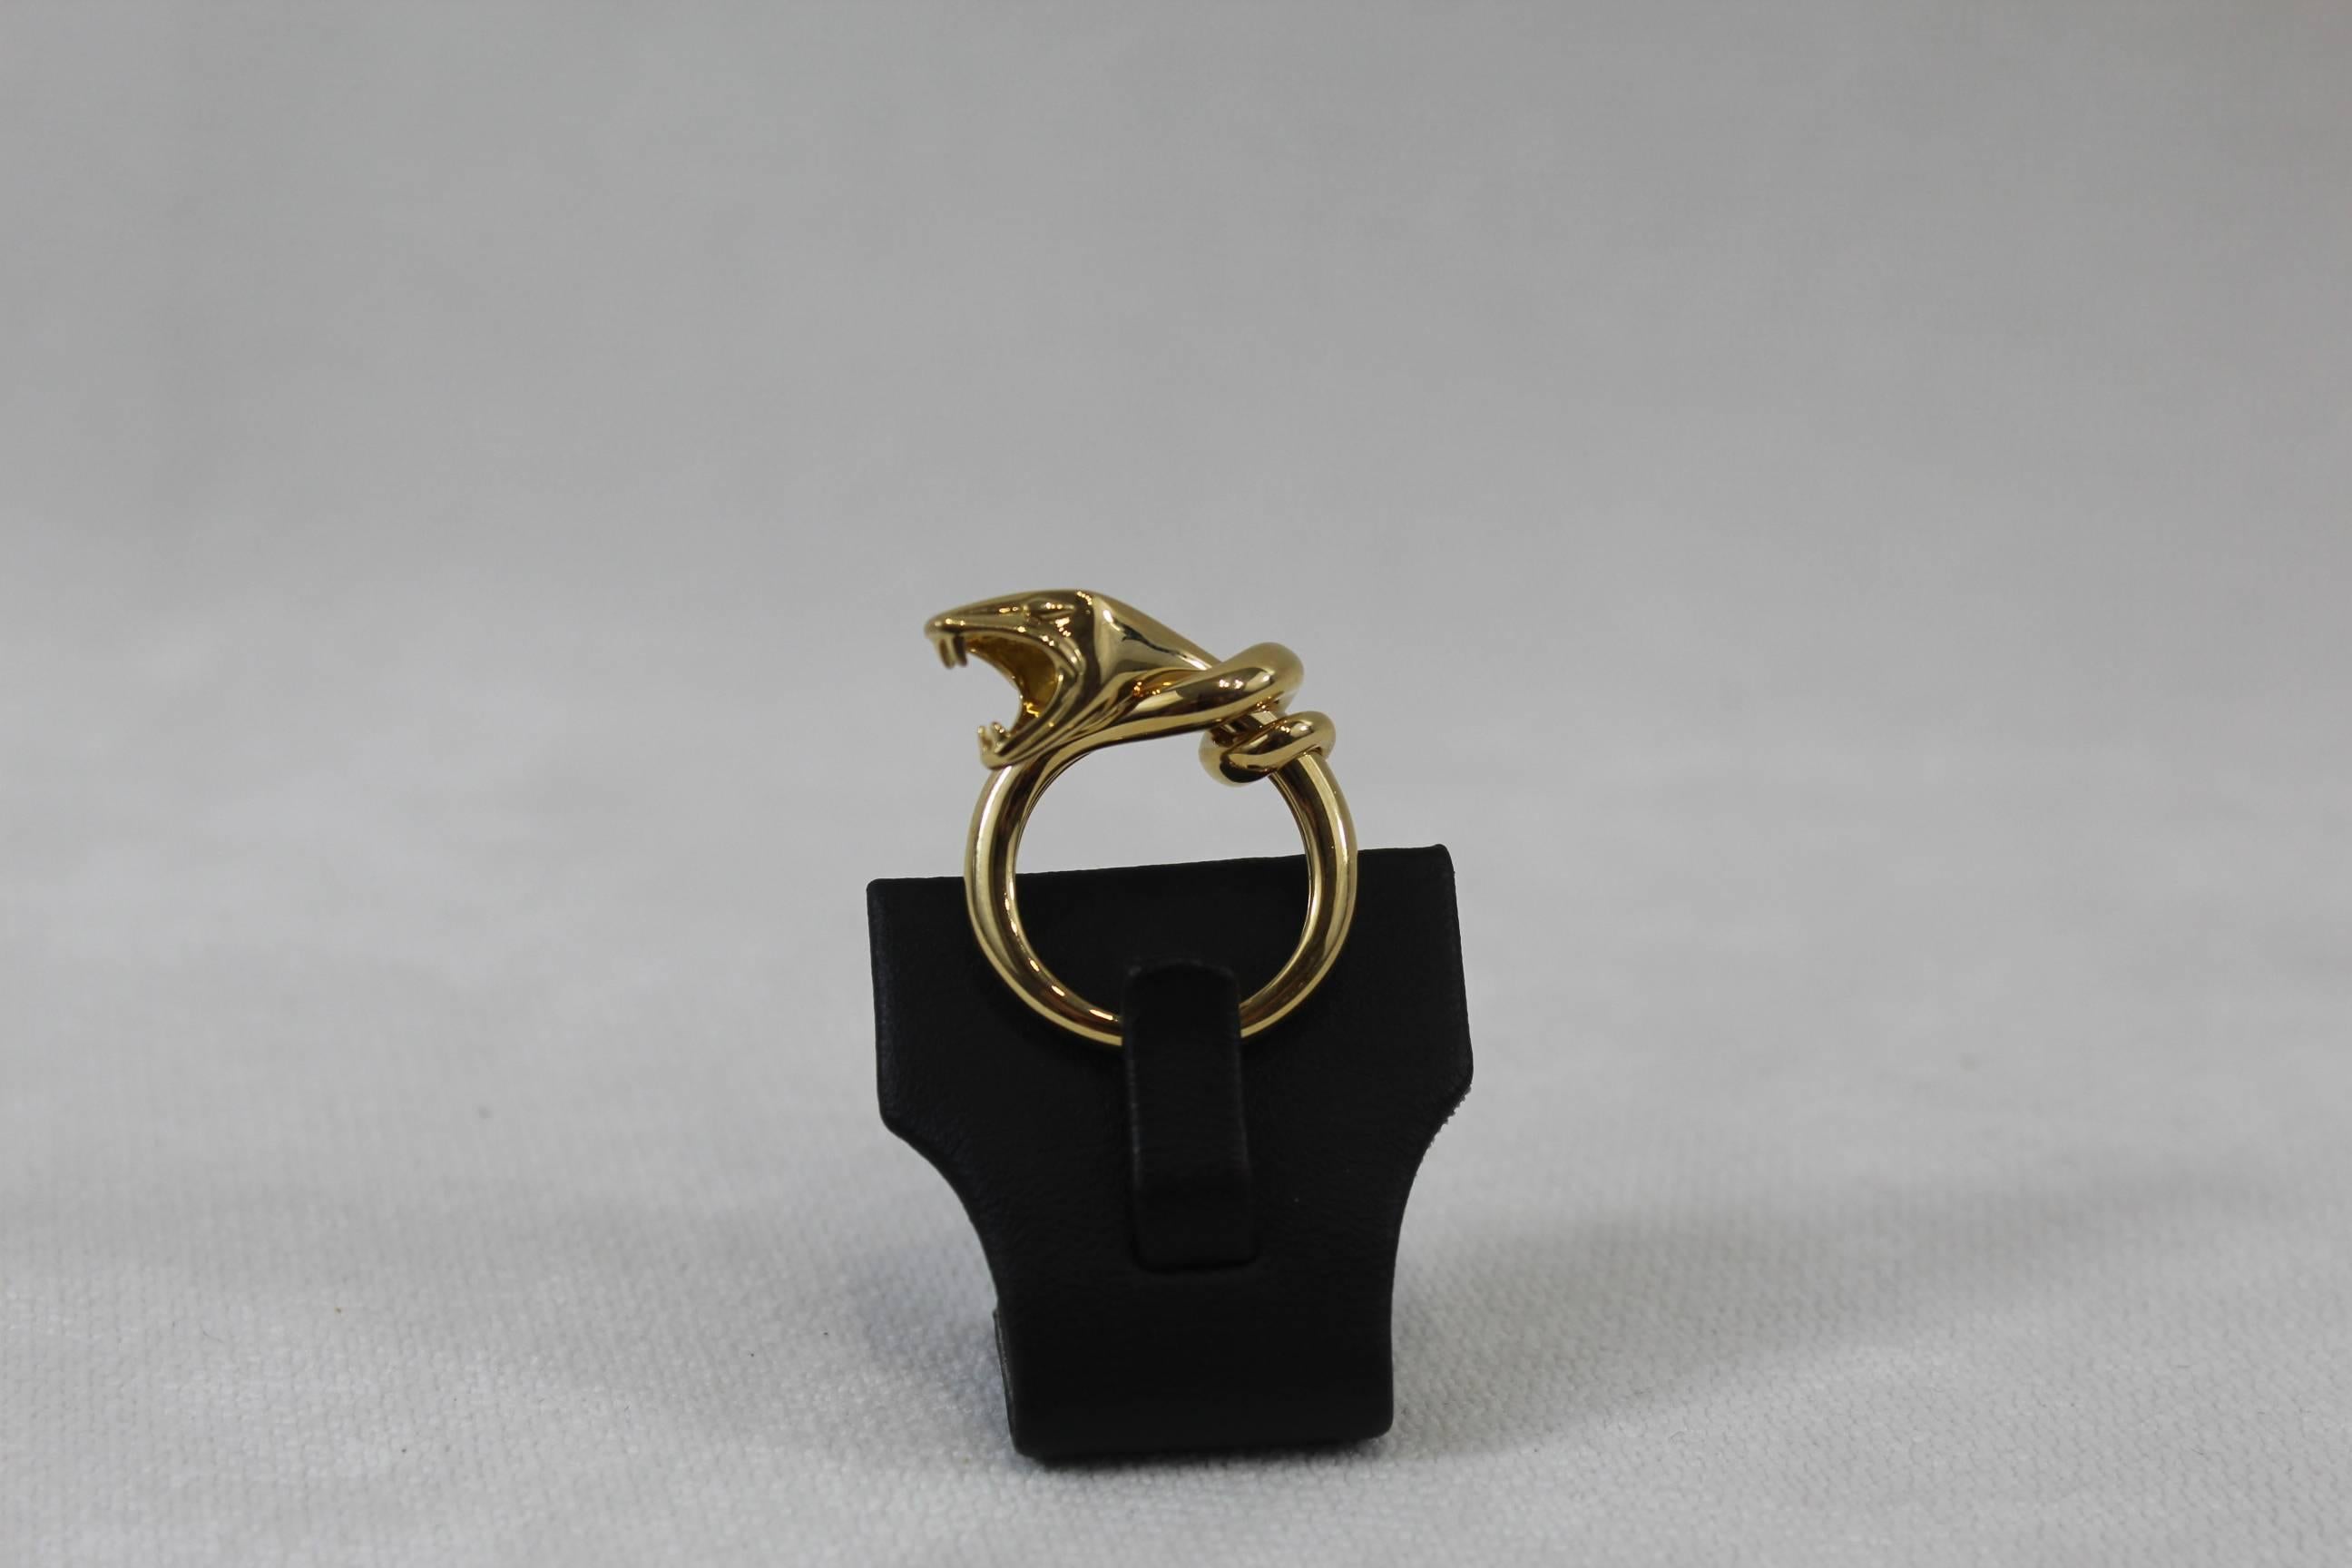 Awesome and like now Boucheron trouble snake ring.
Weight: 10 grammes
Size 52
Like new
Sold with pouch and paper bag